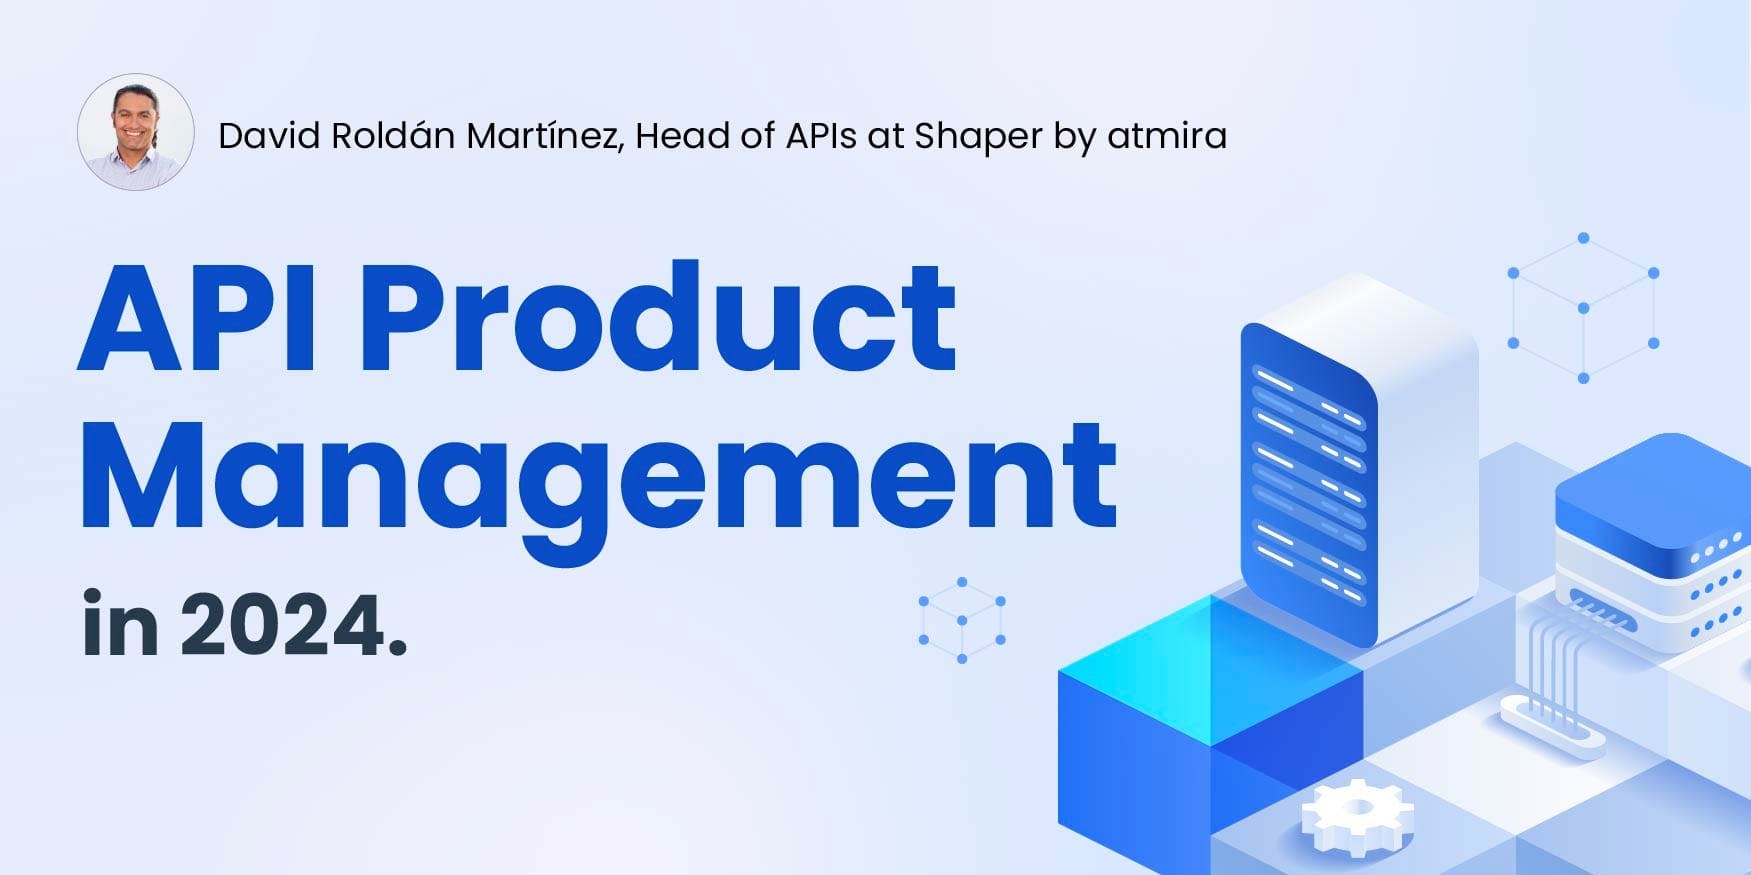 API Product Management in 2024: Insights and Predictions from Expert David Roldán Martínez